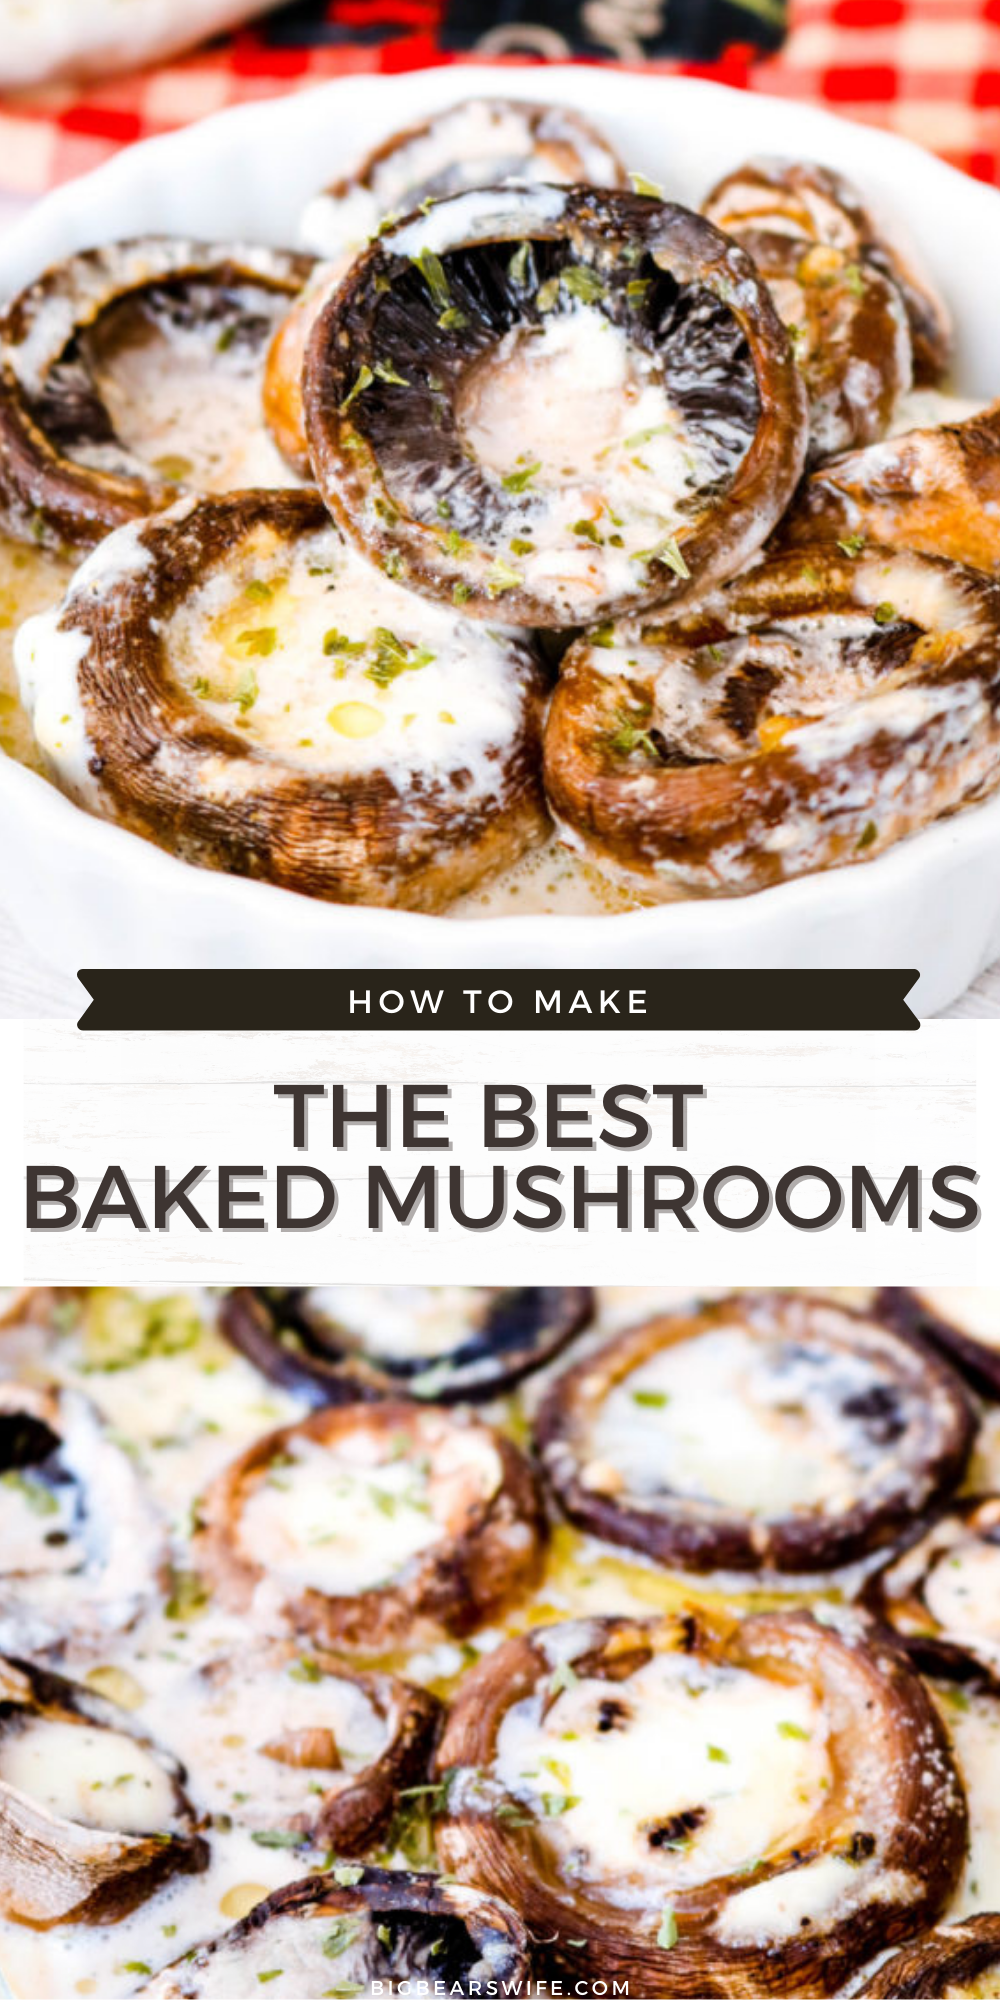 These mushrooms are baked in a tasty seasoned cream sauce and they're perfect as a party appetizer or as a side dish for lunch or dinner! They may be The BEST Baked Mushrooms I've ever had. #bakedmushrooms #mushrooms   via @bigbearswife